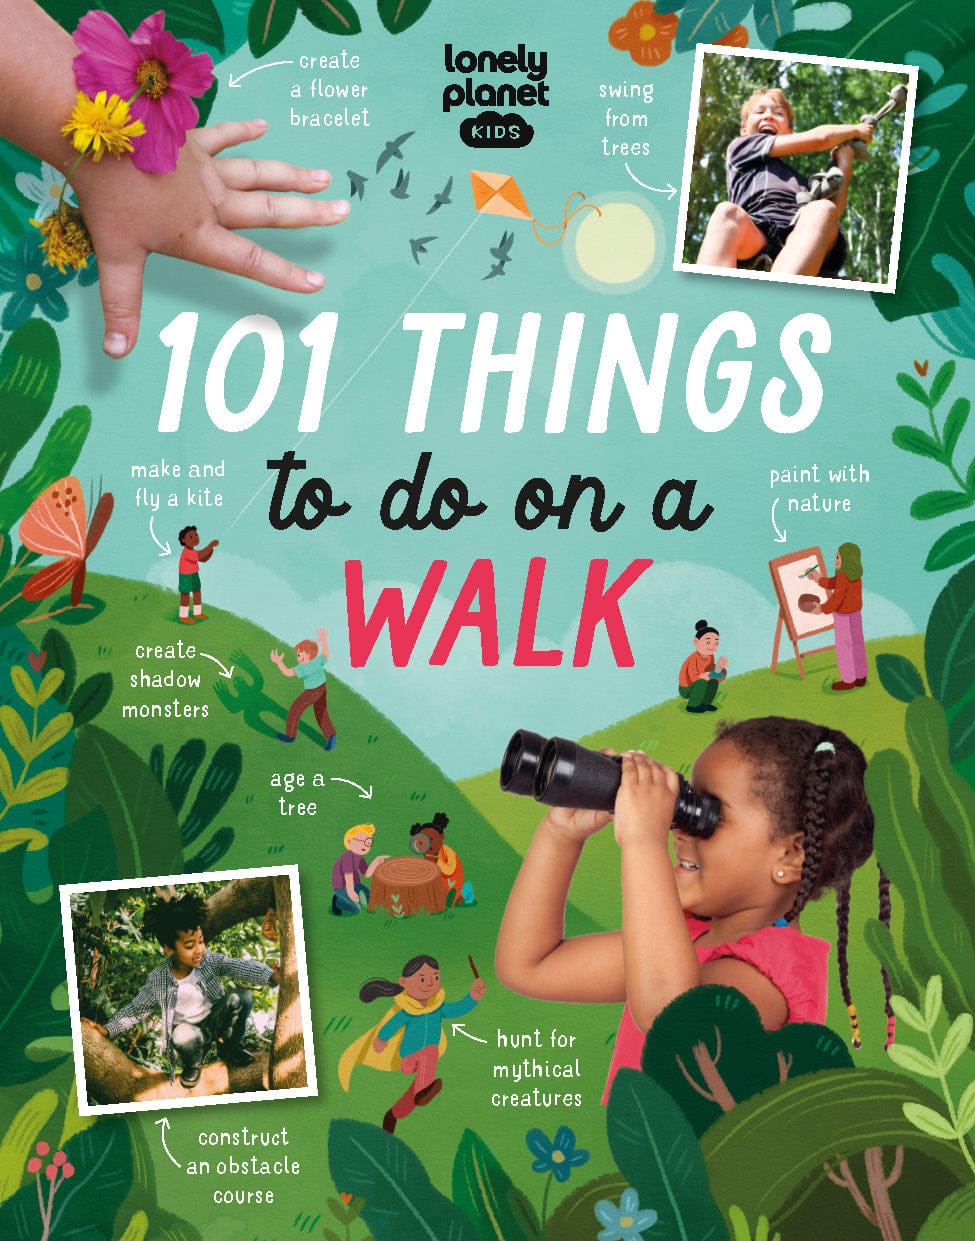 Lonely Planet Kids: 101 Things to do on a Walk